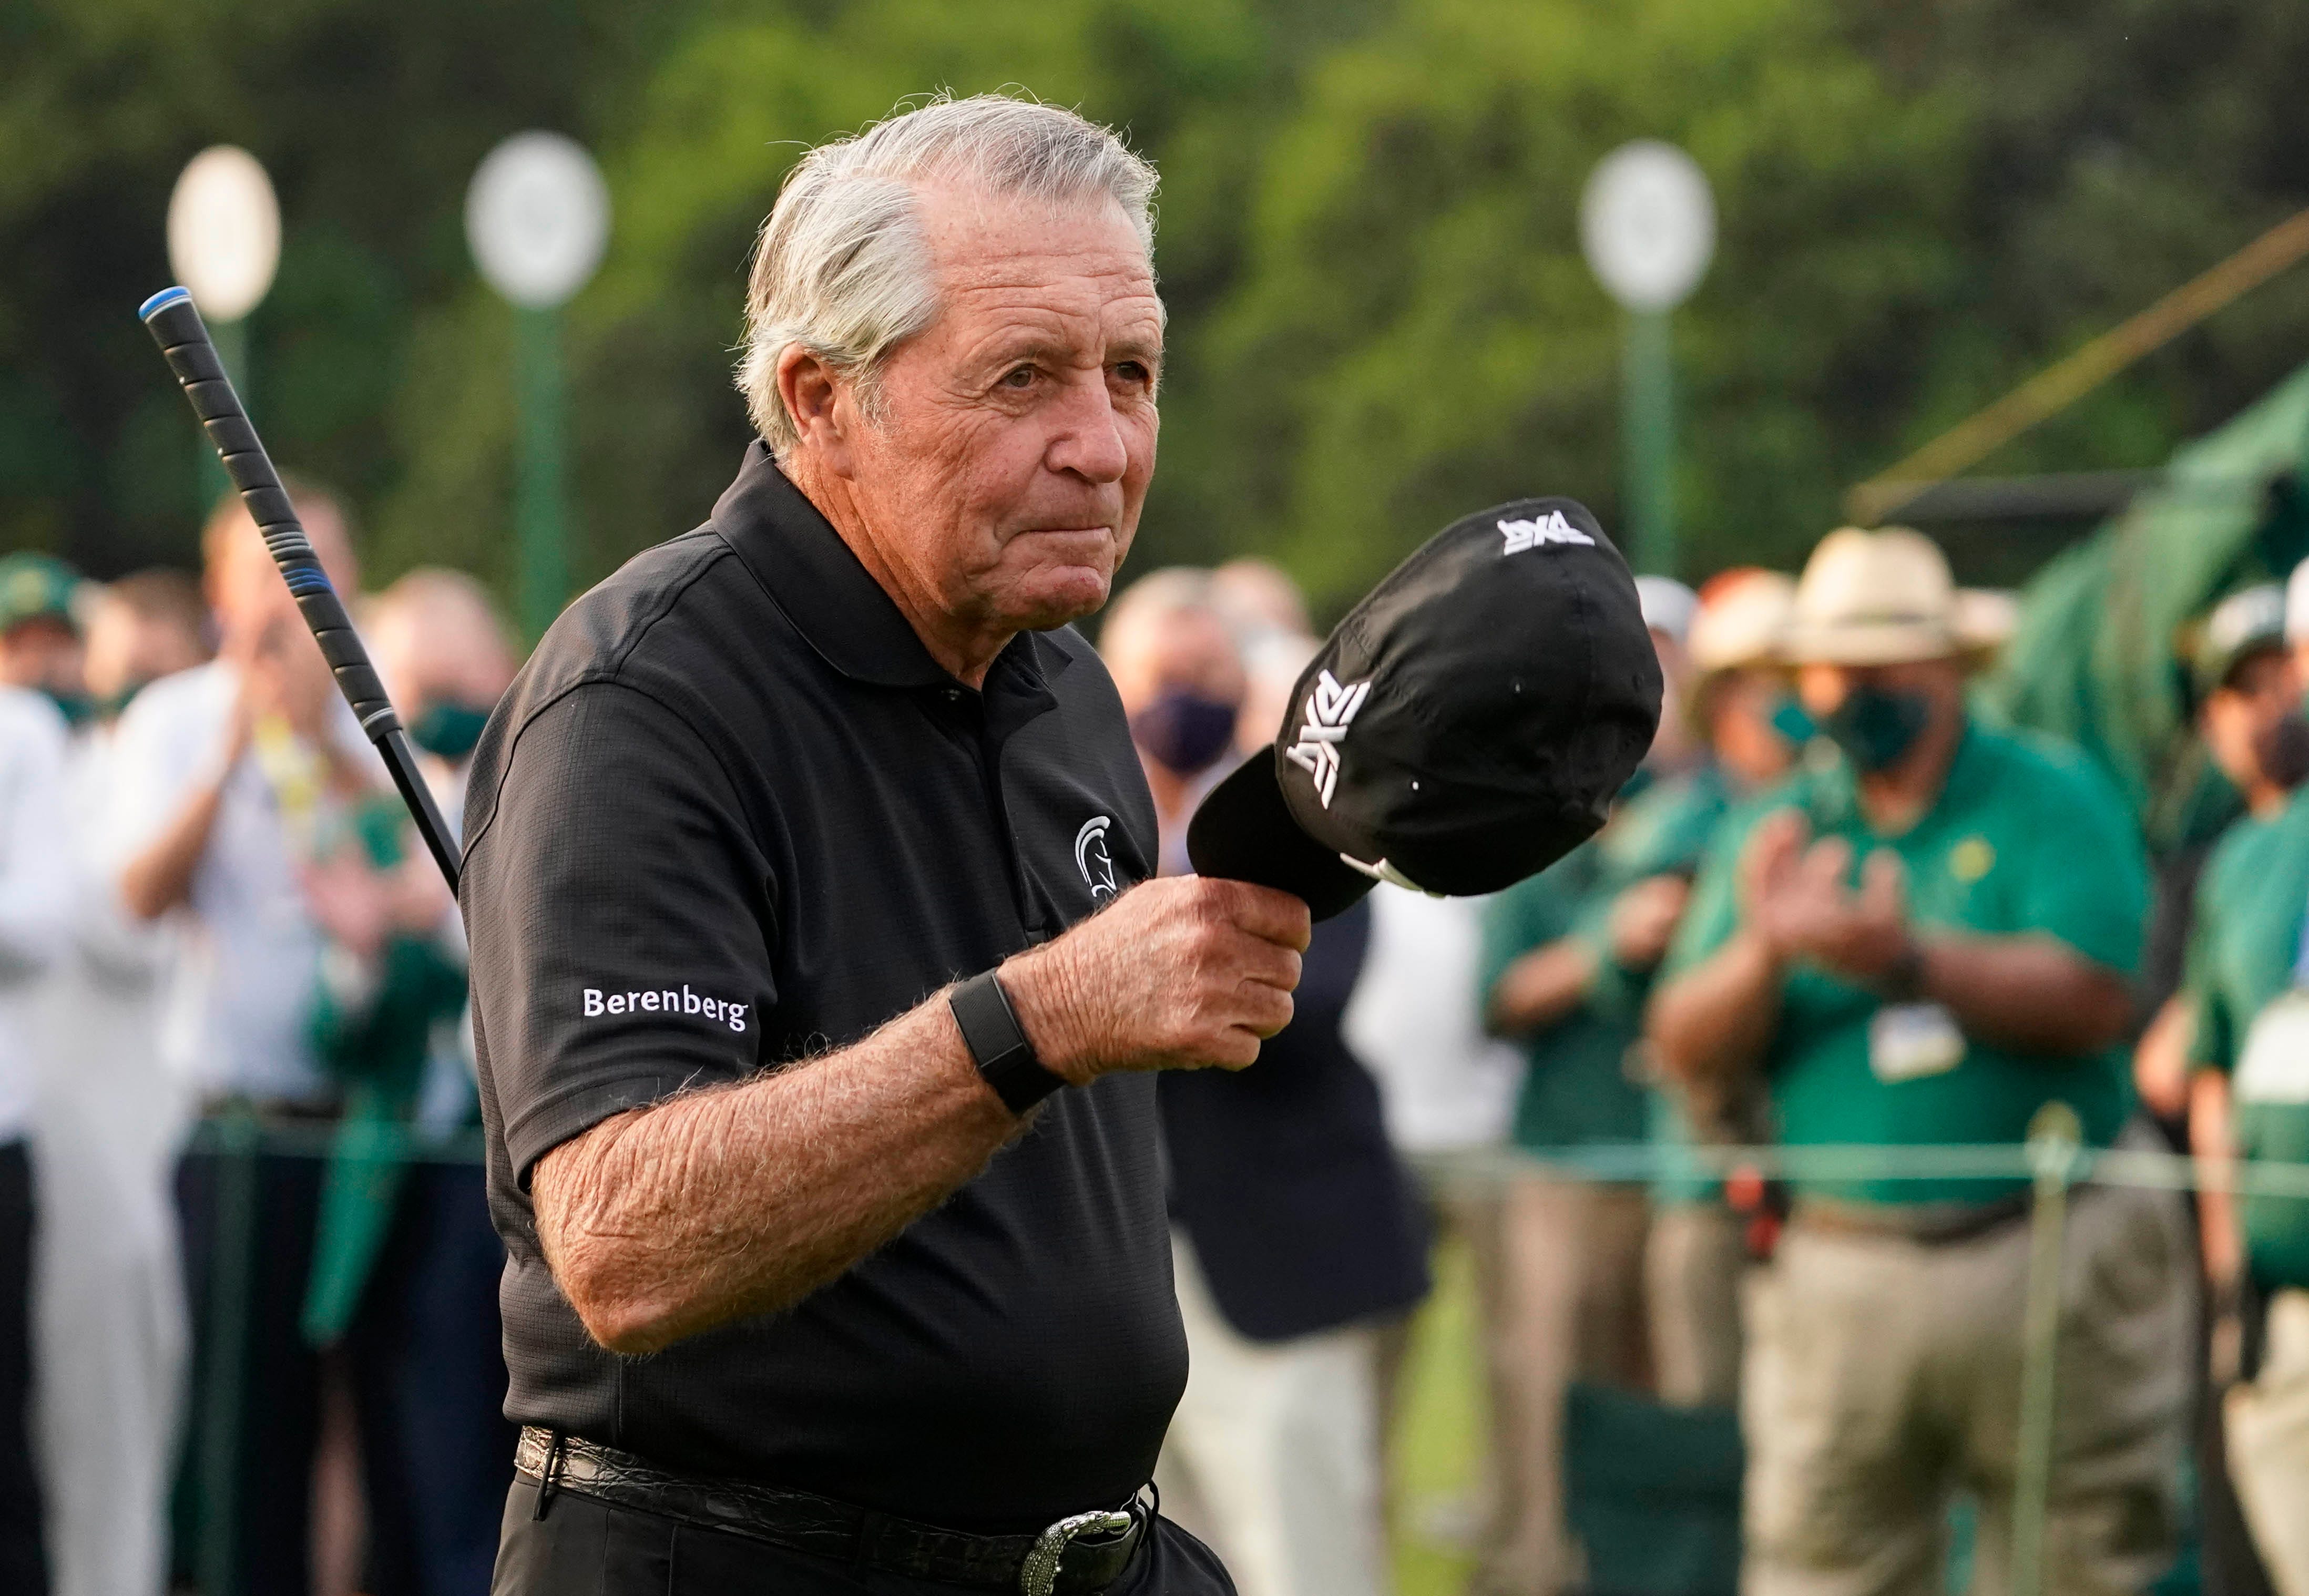 Gary Player Puts The Masters Last in His List of Best Majors